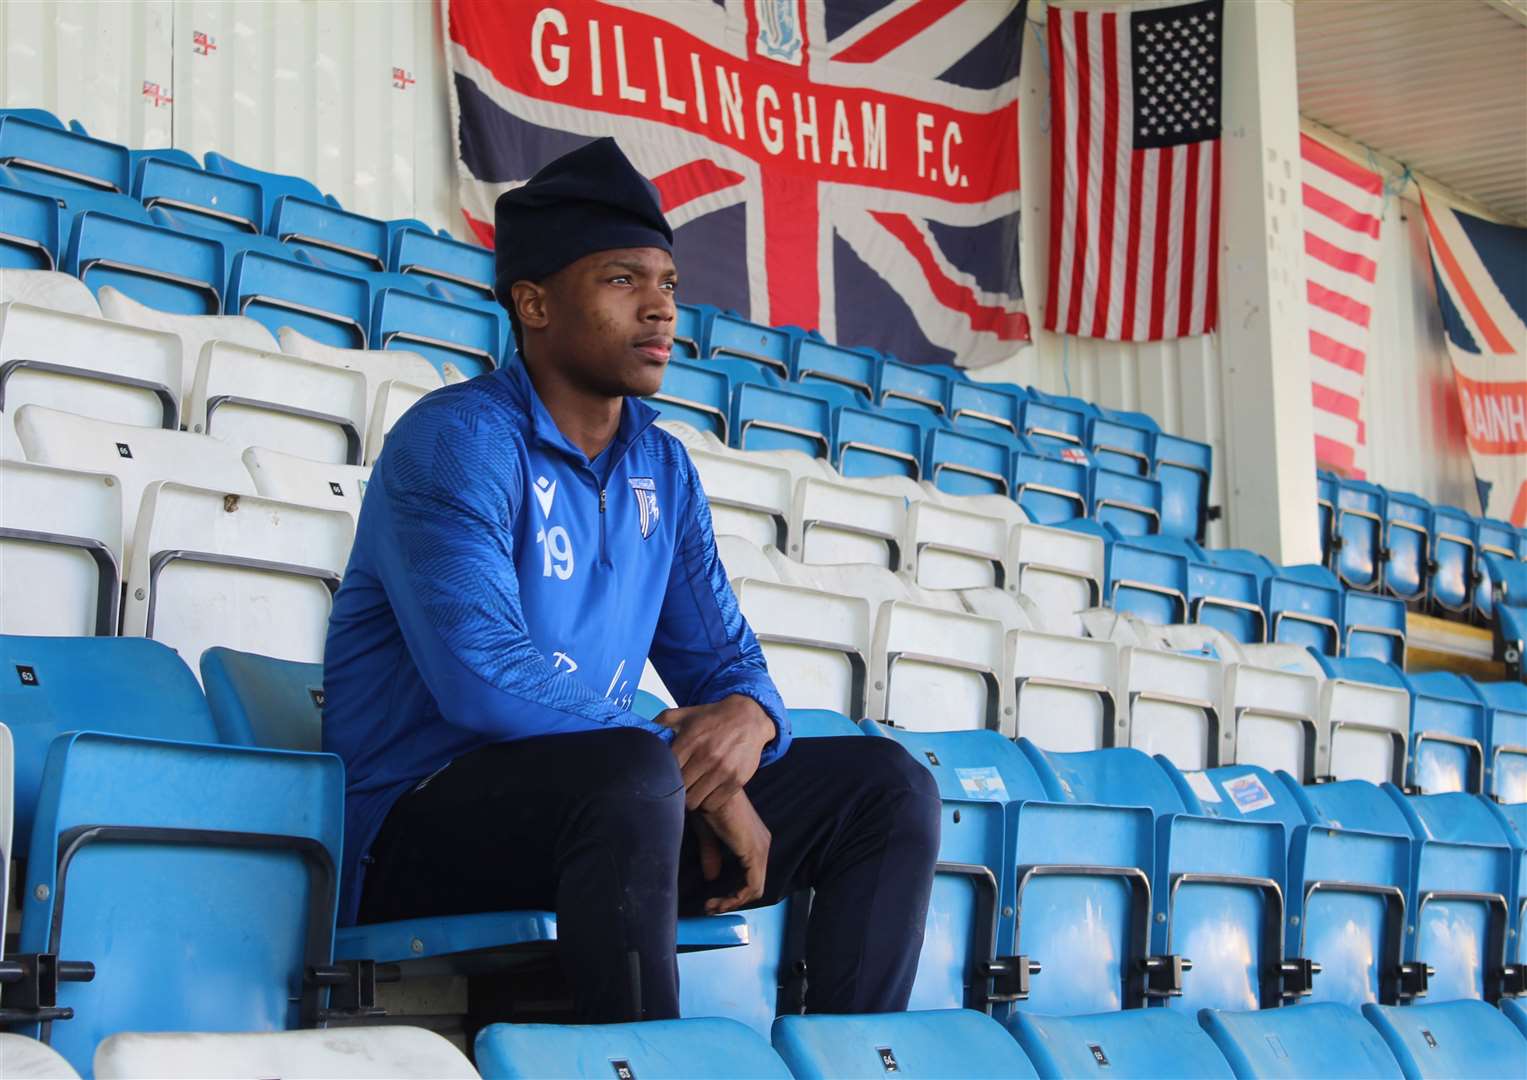 Gillingham’s new signing Jorge Cabezas Hurtado has joined from Championship side Watford